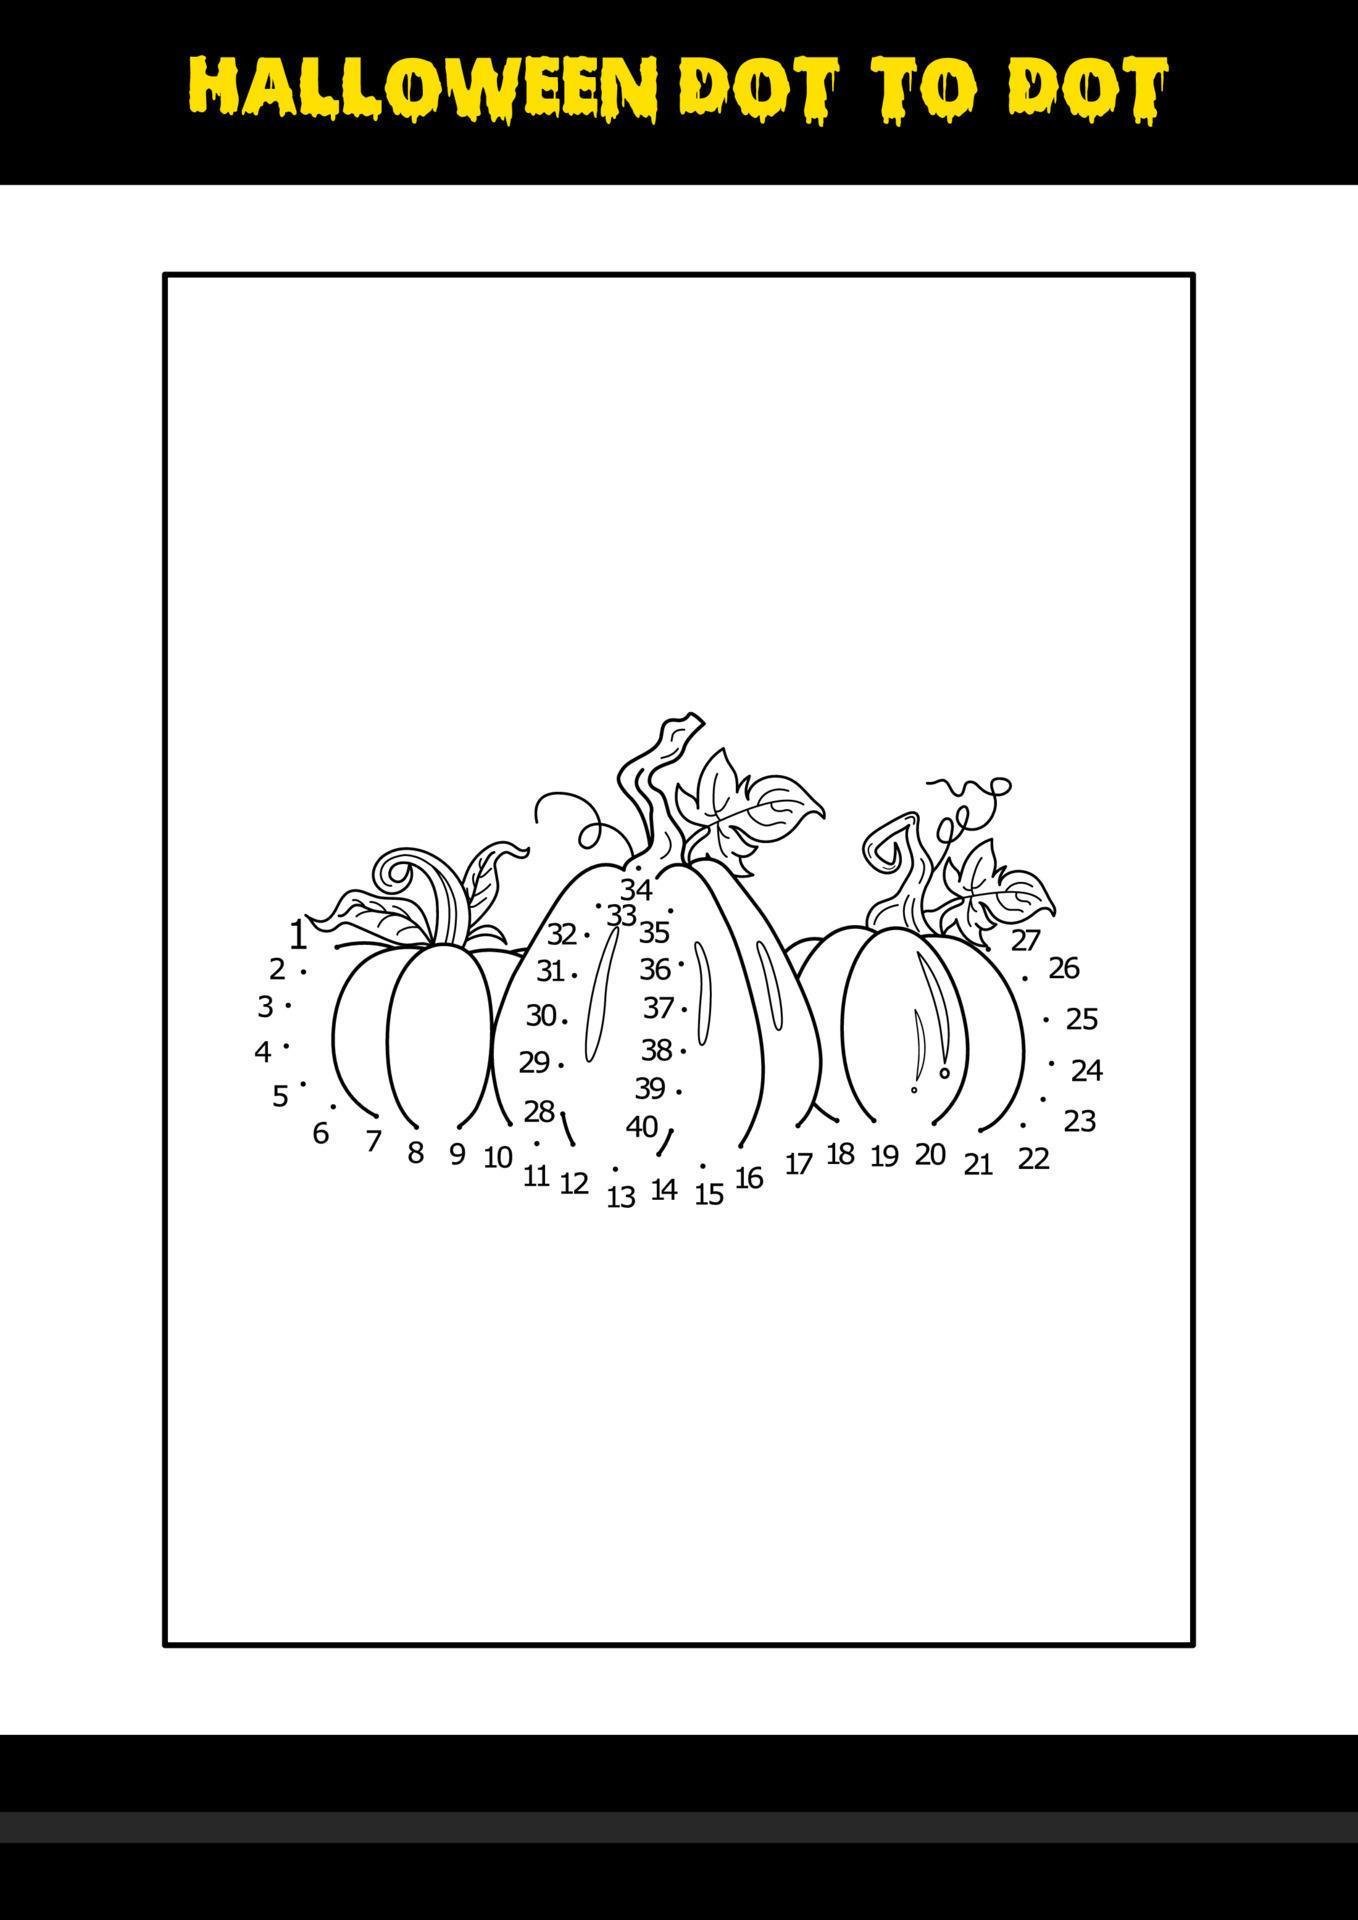 halloween-dot-to-dot-coloring-page-for-kids-line-art-coloring-page-design-for-kids-12984180